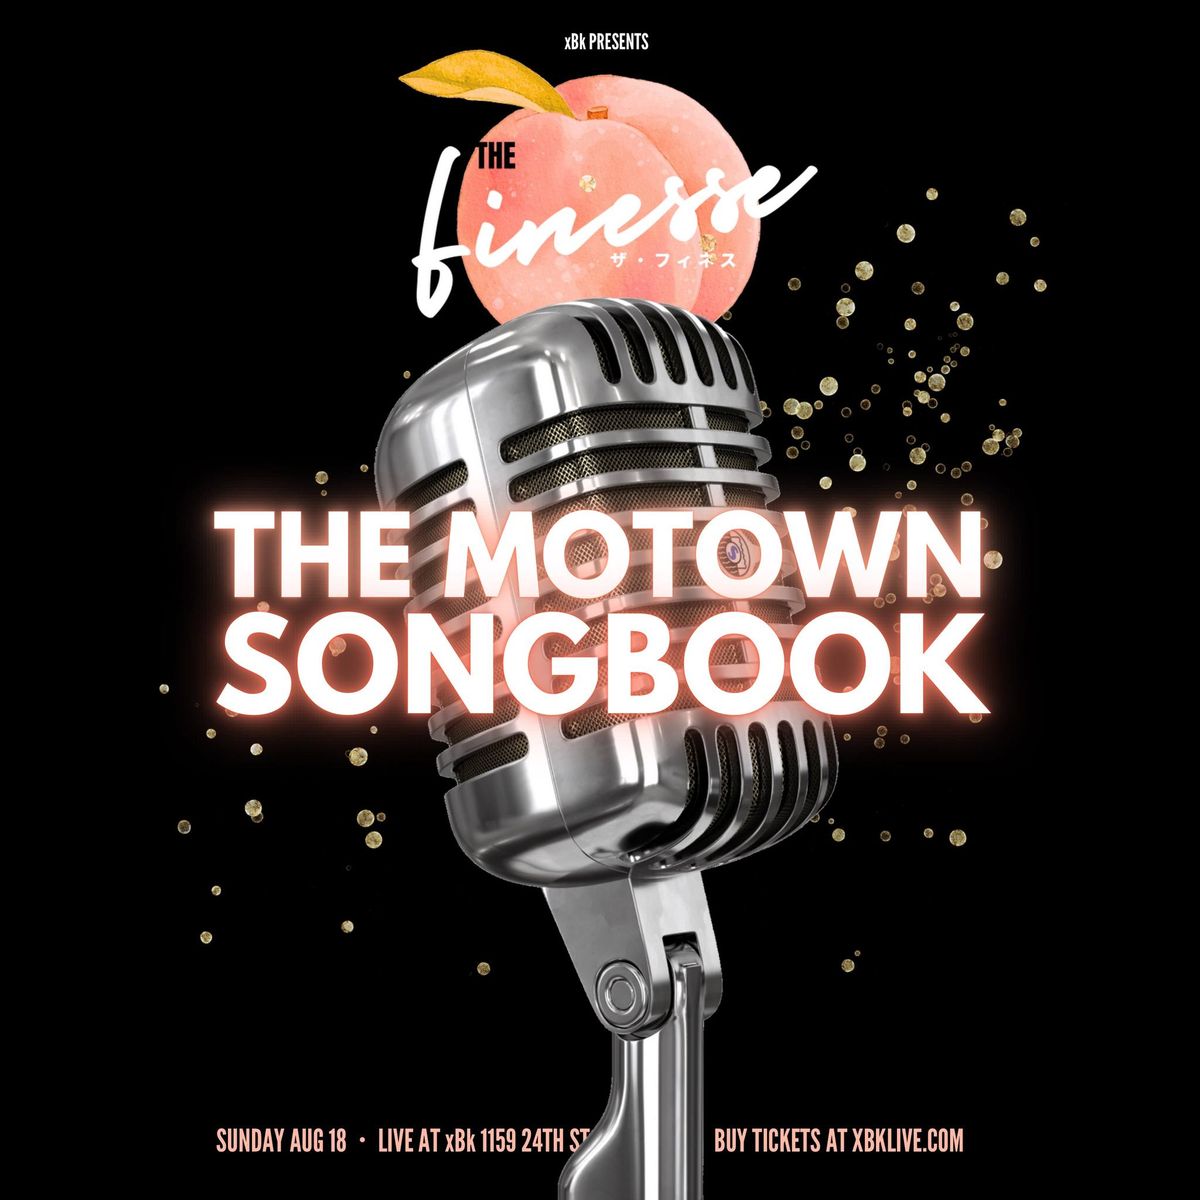 The Motown Songbook Featuring The Finesse